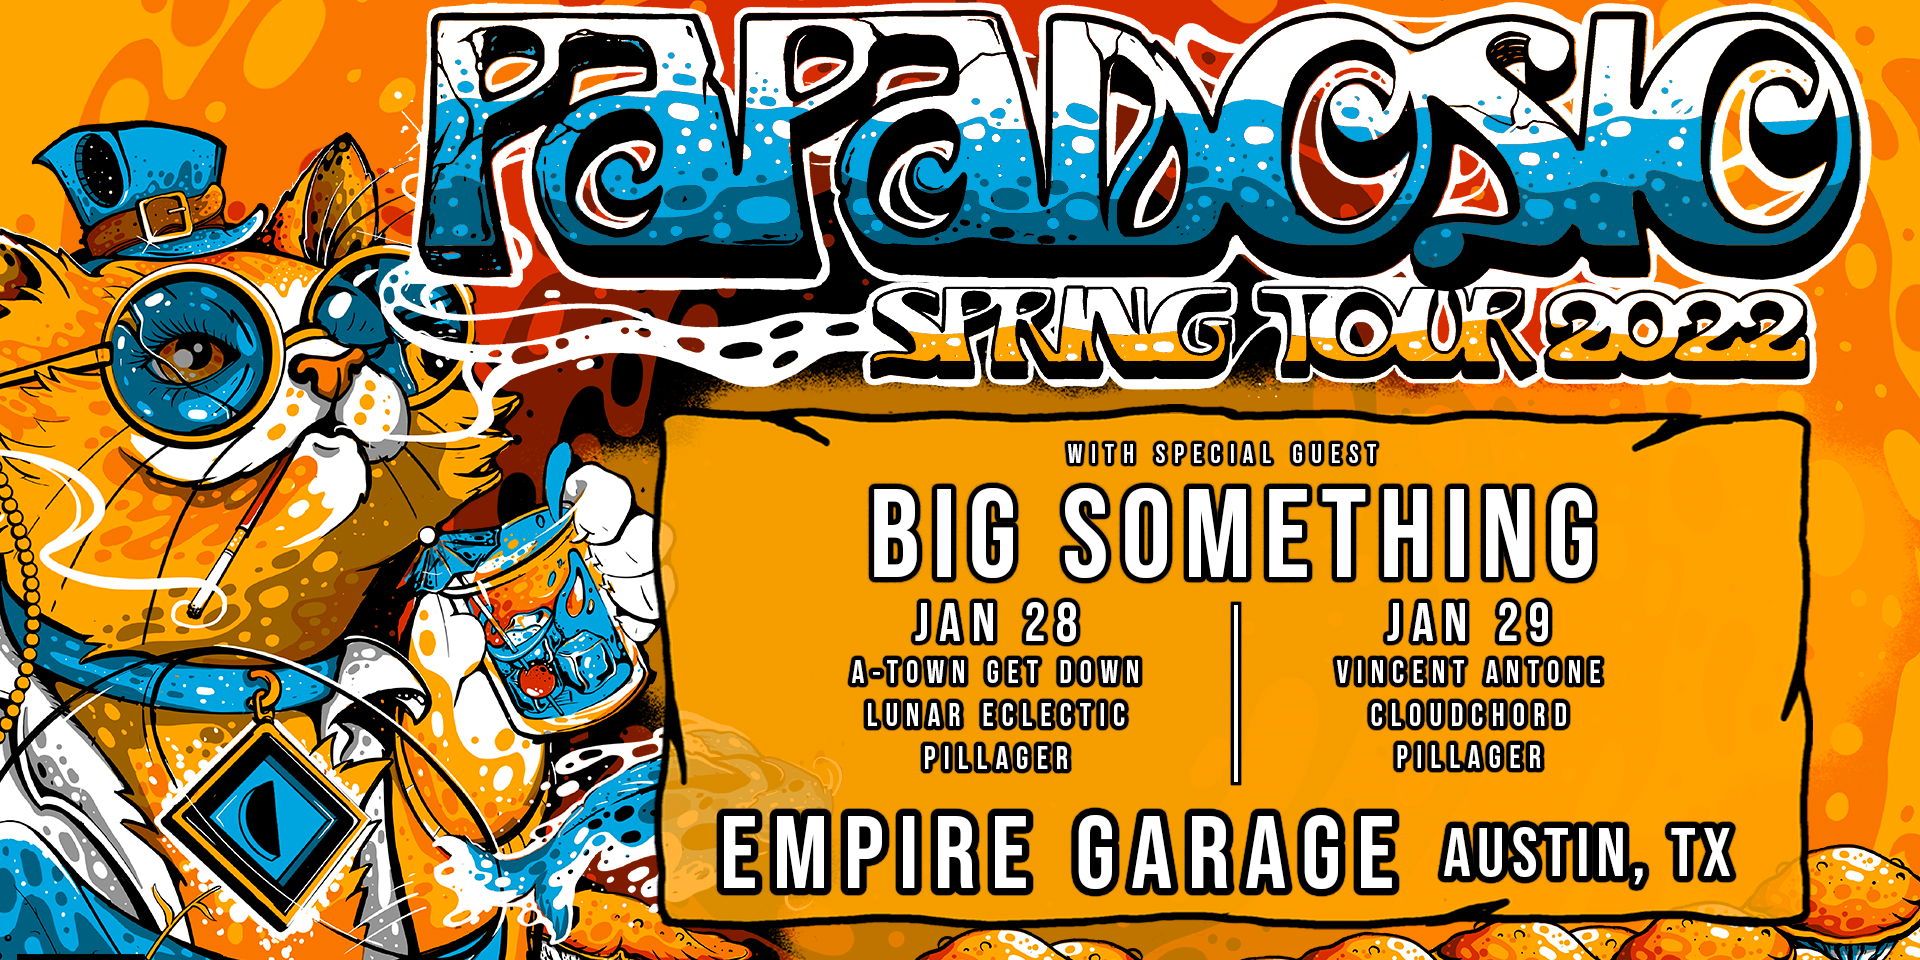 Papadosio w/ Special Guest Big Something at Empire Garage - 1/28 promotional image